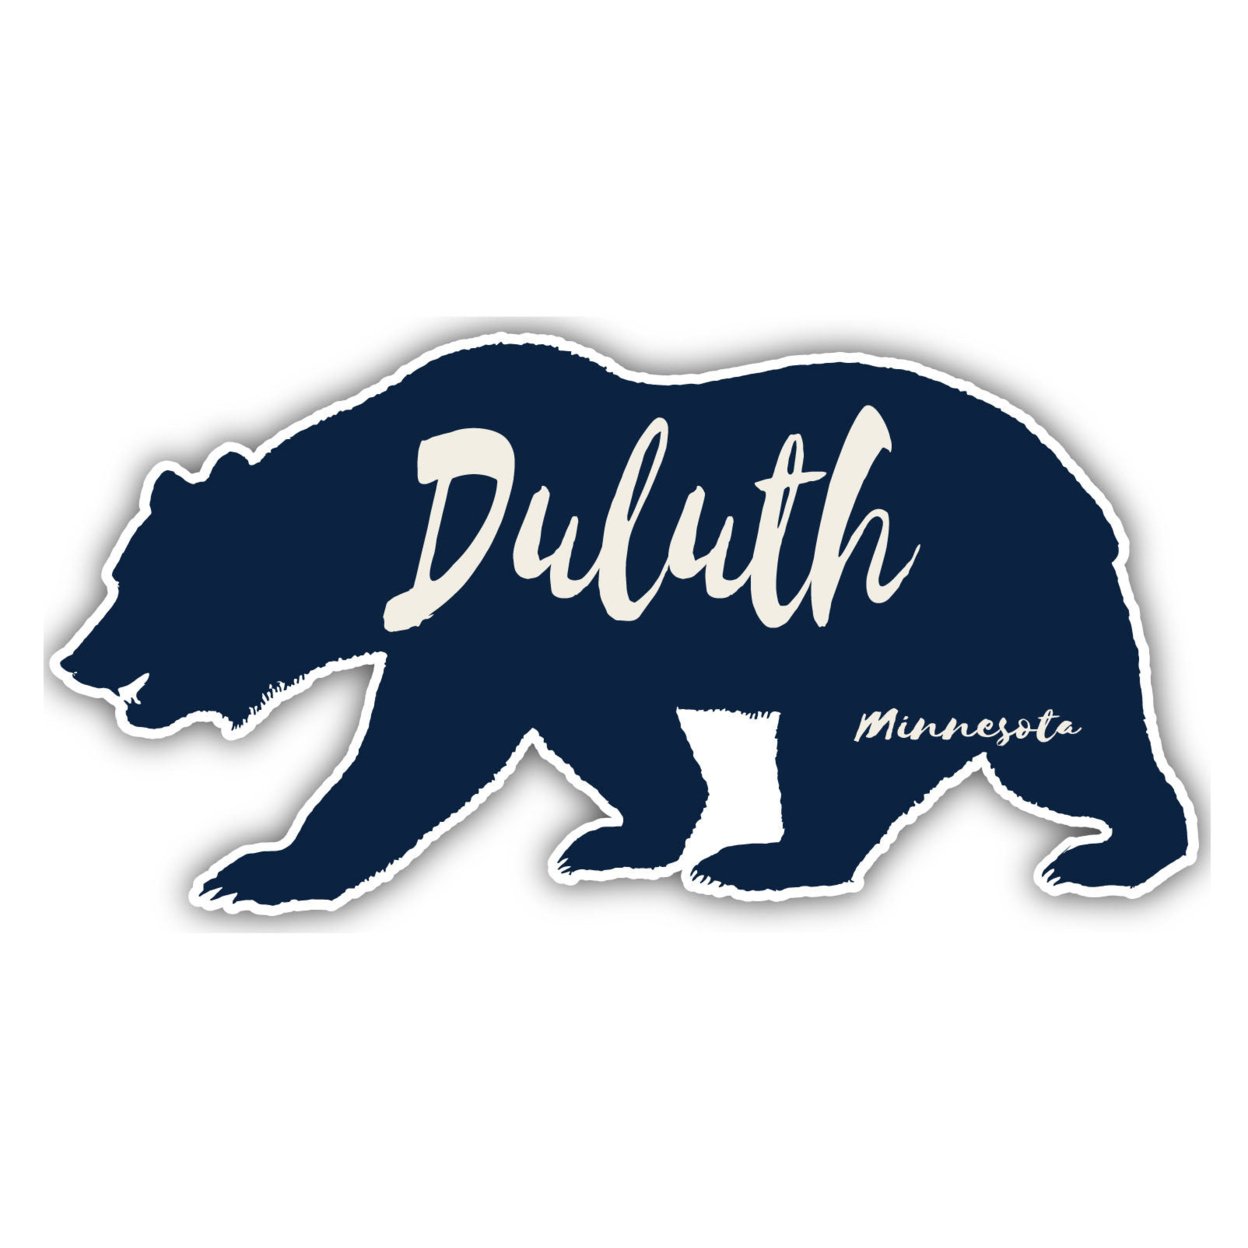 Duluth Minnesota Souvenir Decorative Stickers (Choose Theme And Size) - 4-Pack, 4-Inch, Adventures Awaits